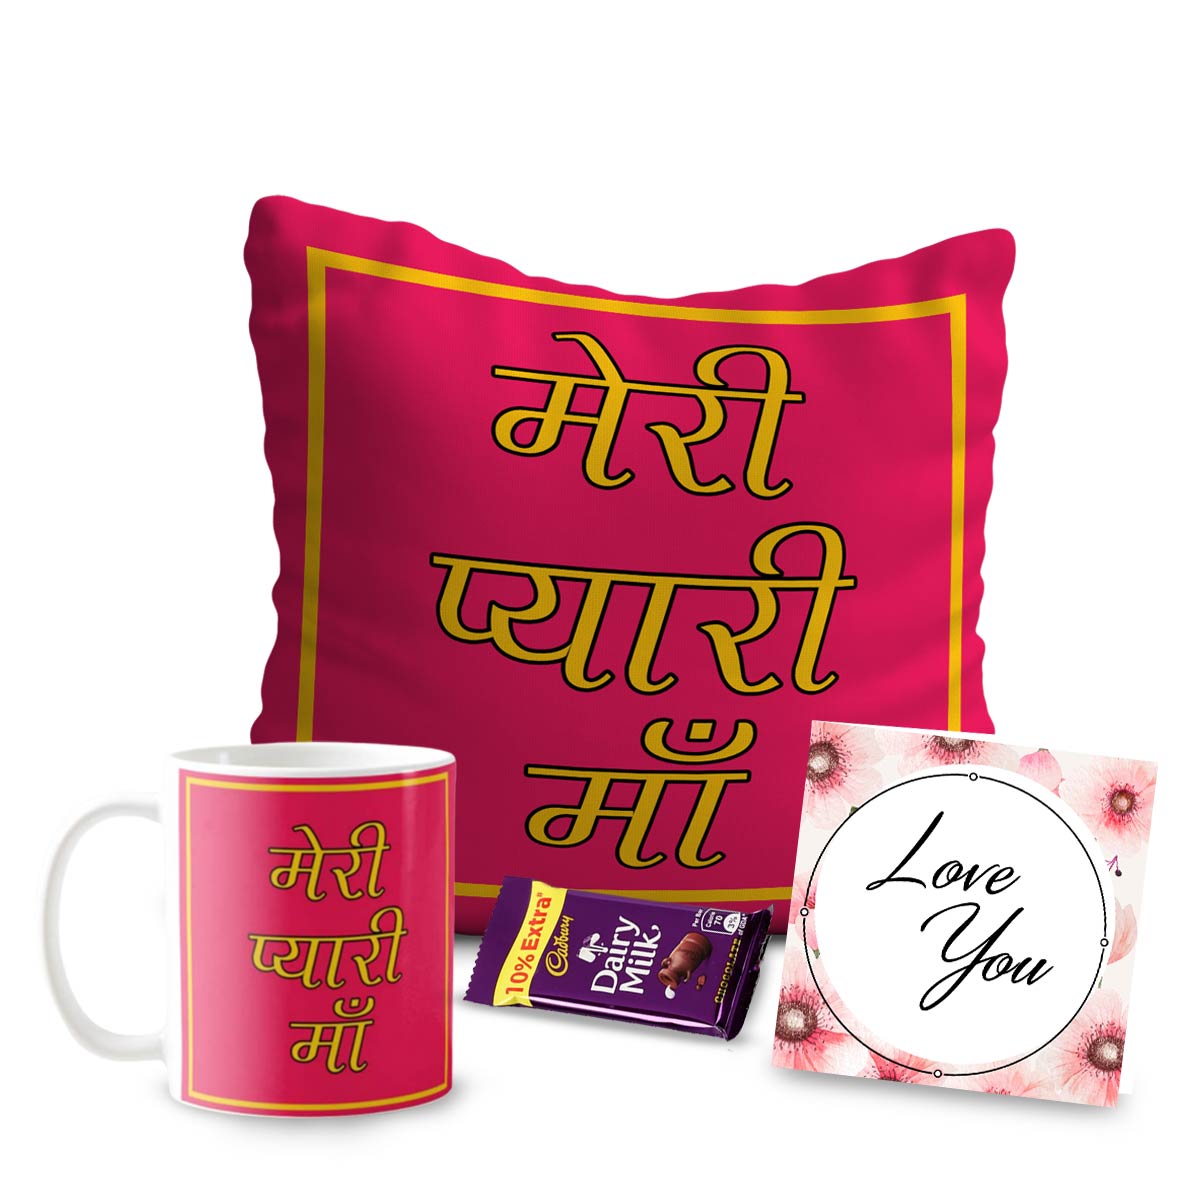 Midiron Tasty & Delicious Handmade Chocolate |Best gift for mummy on  Mother's Day | Sleeping Eye Mask Gift for Maa/Nani | Printed Coffee Mug,  Chocolate Box and greeting card : Amazon.in: Grocery